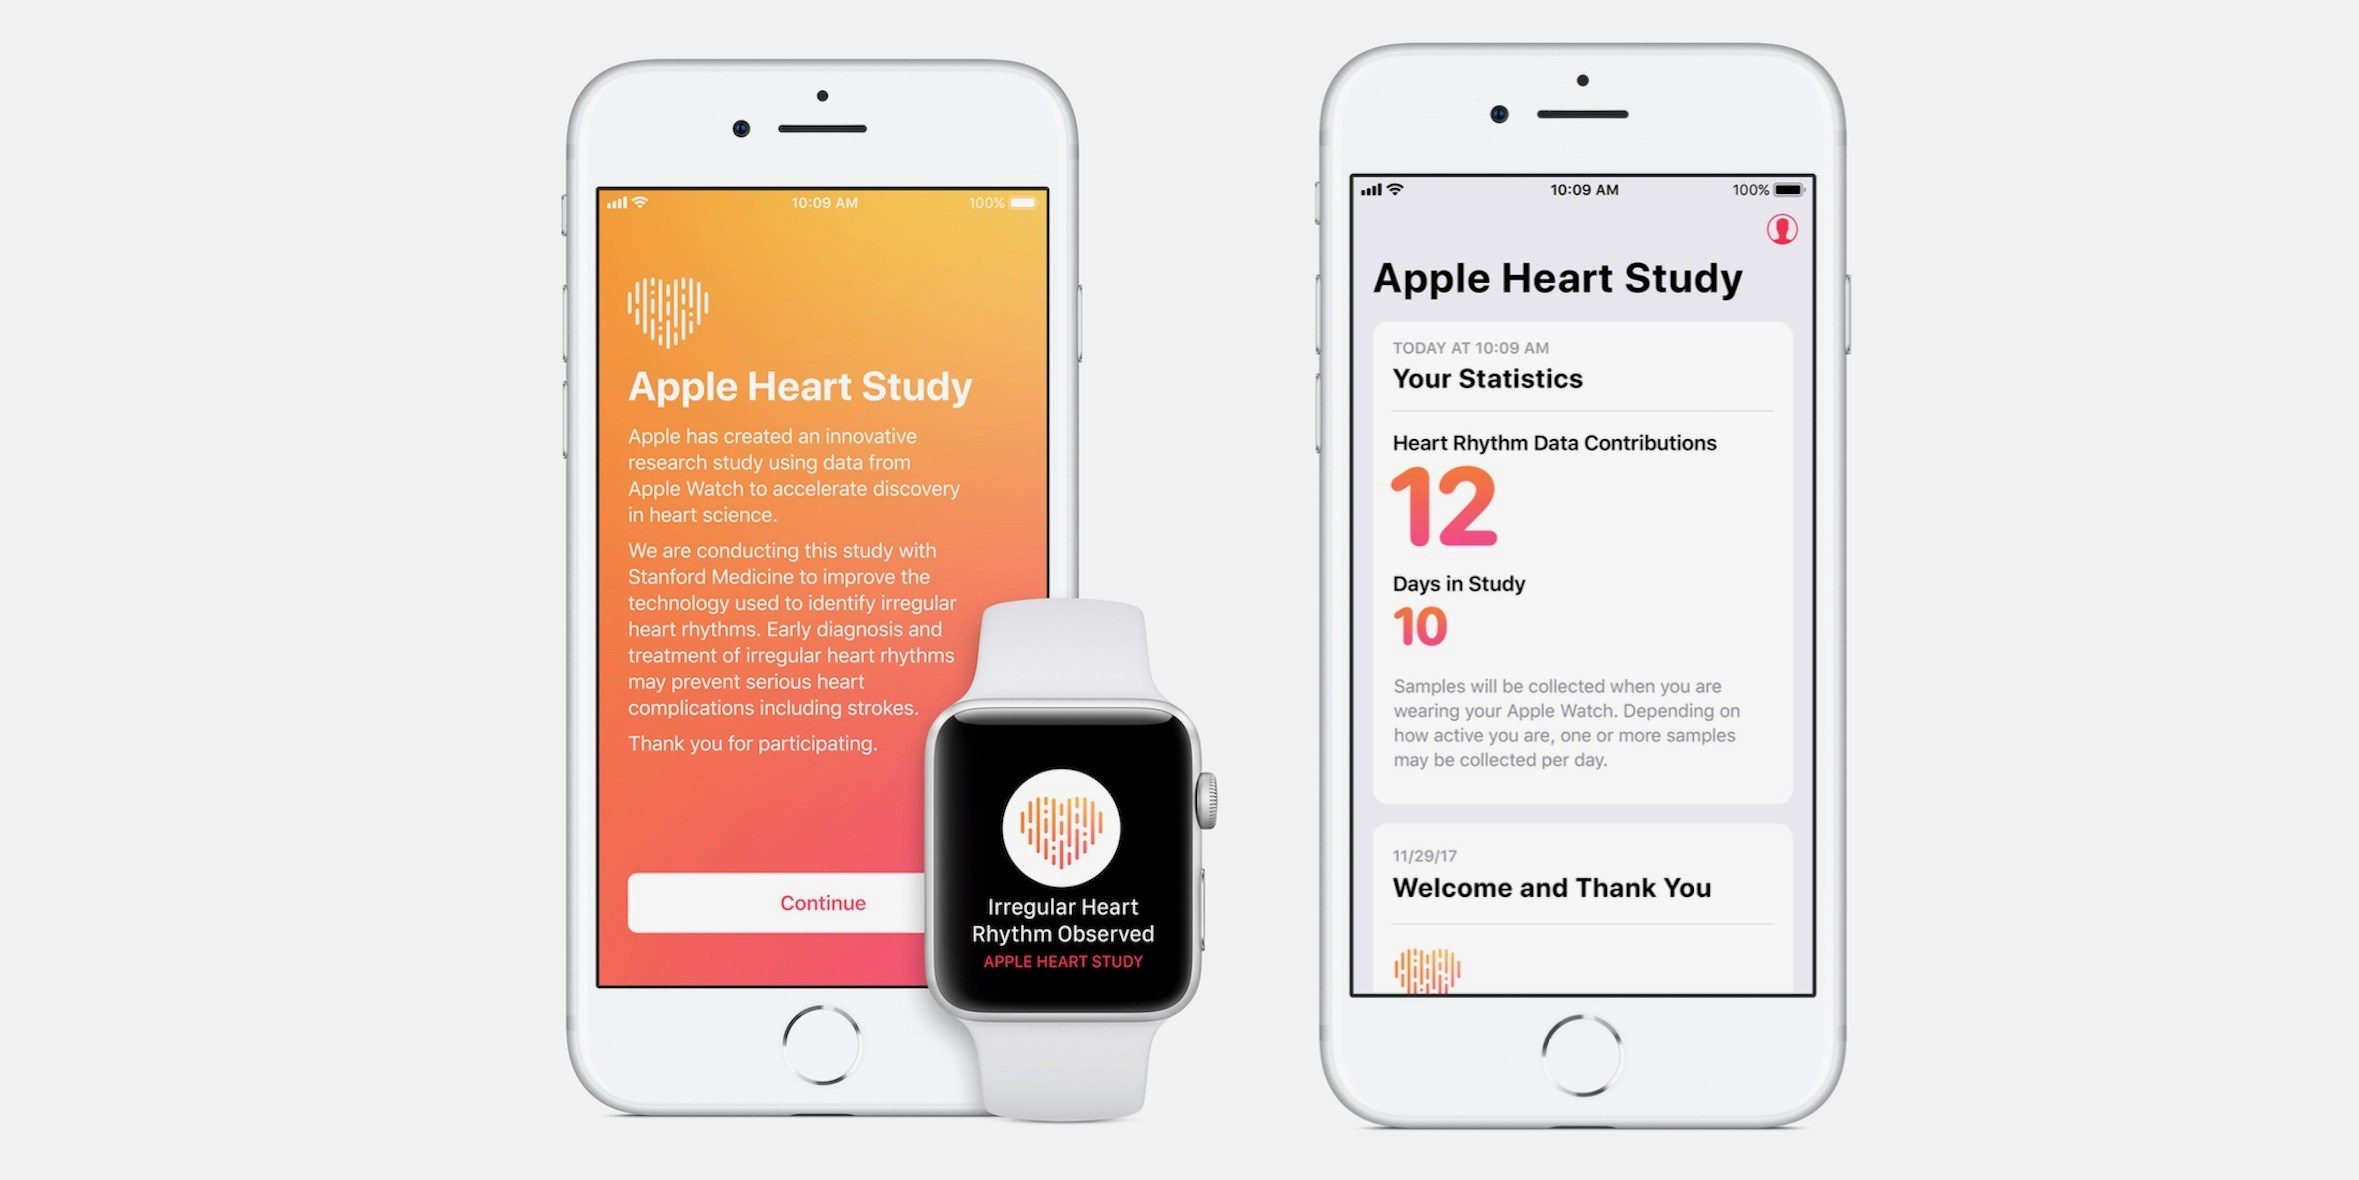 Apple and Stanford Medicine Announce Full Results From Apple Watch Heart Study